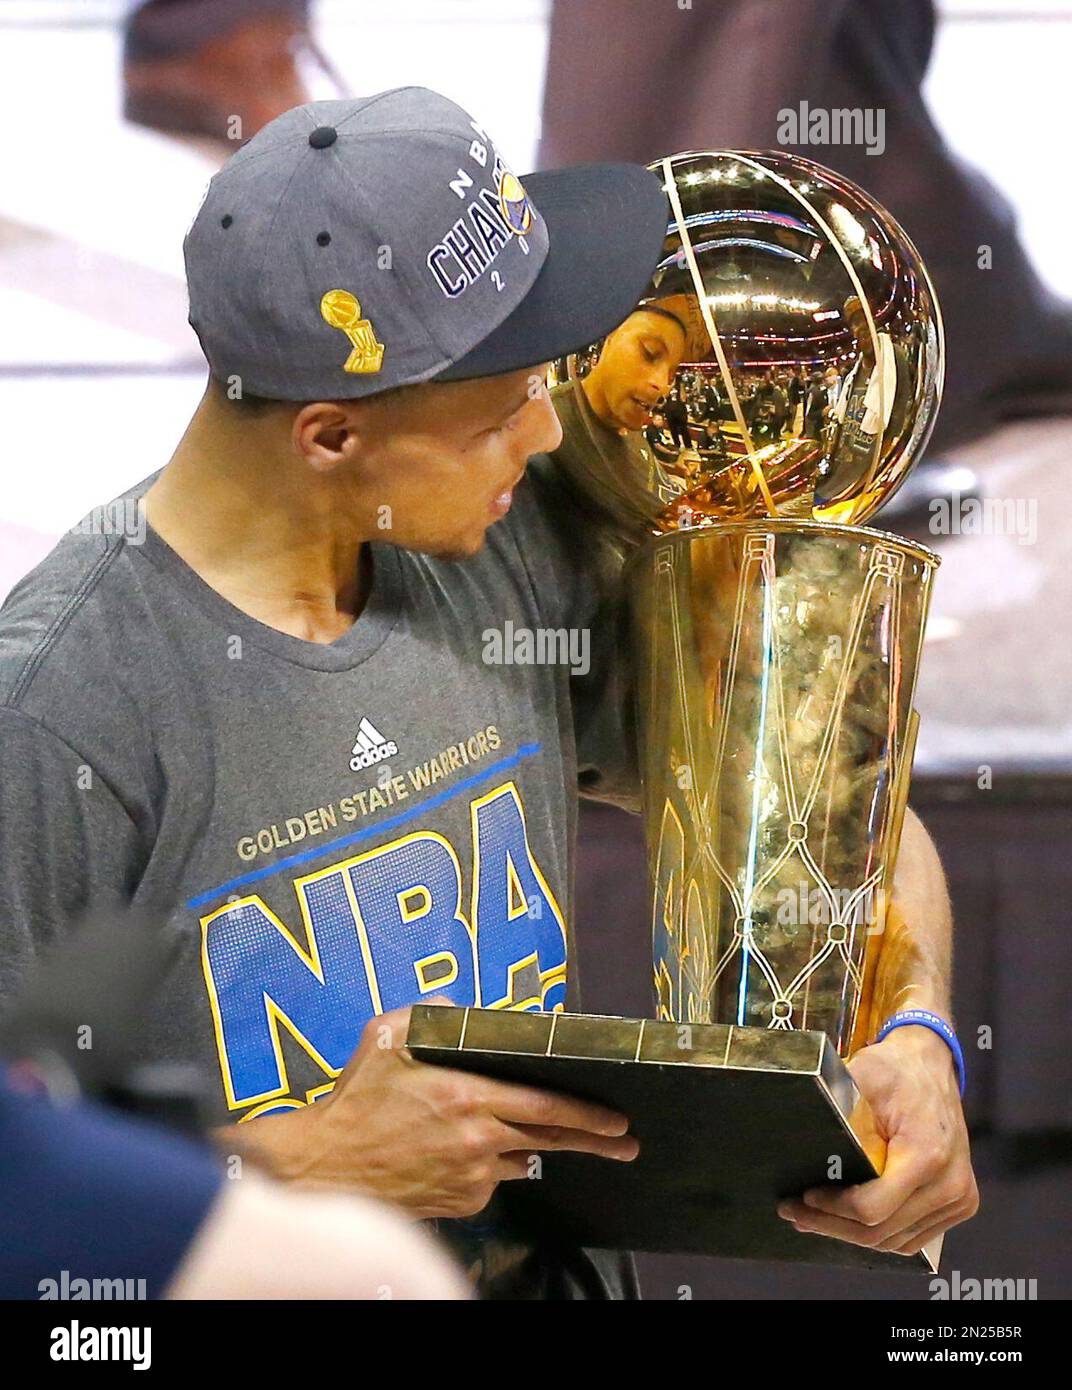 Reacting to the NBA Finals trophy being presented in a Louis